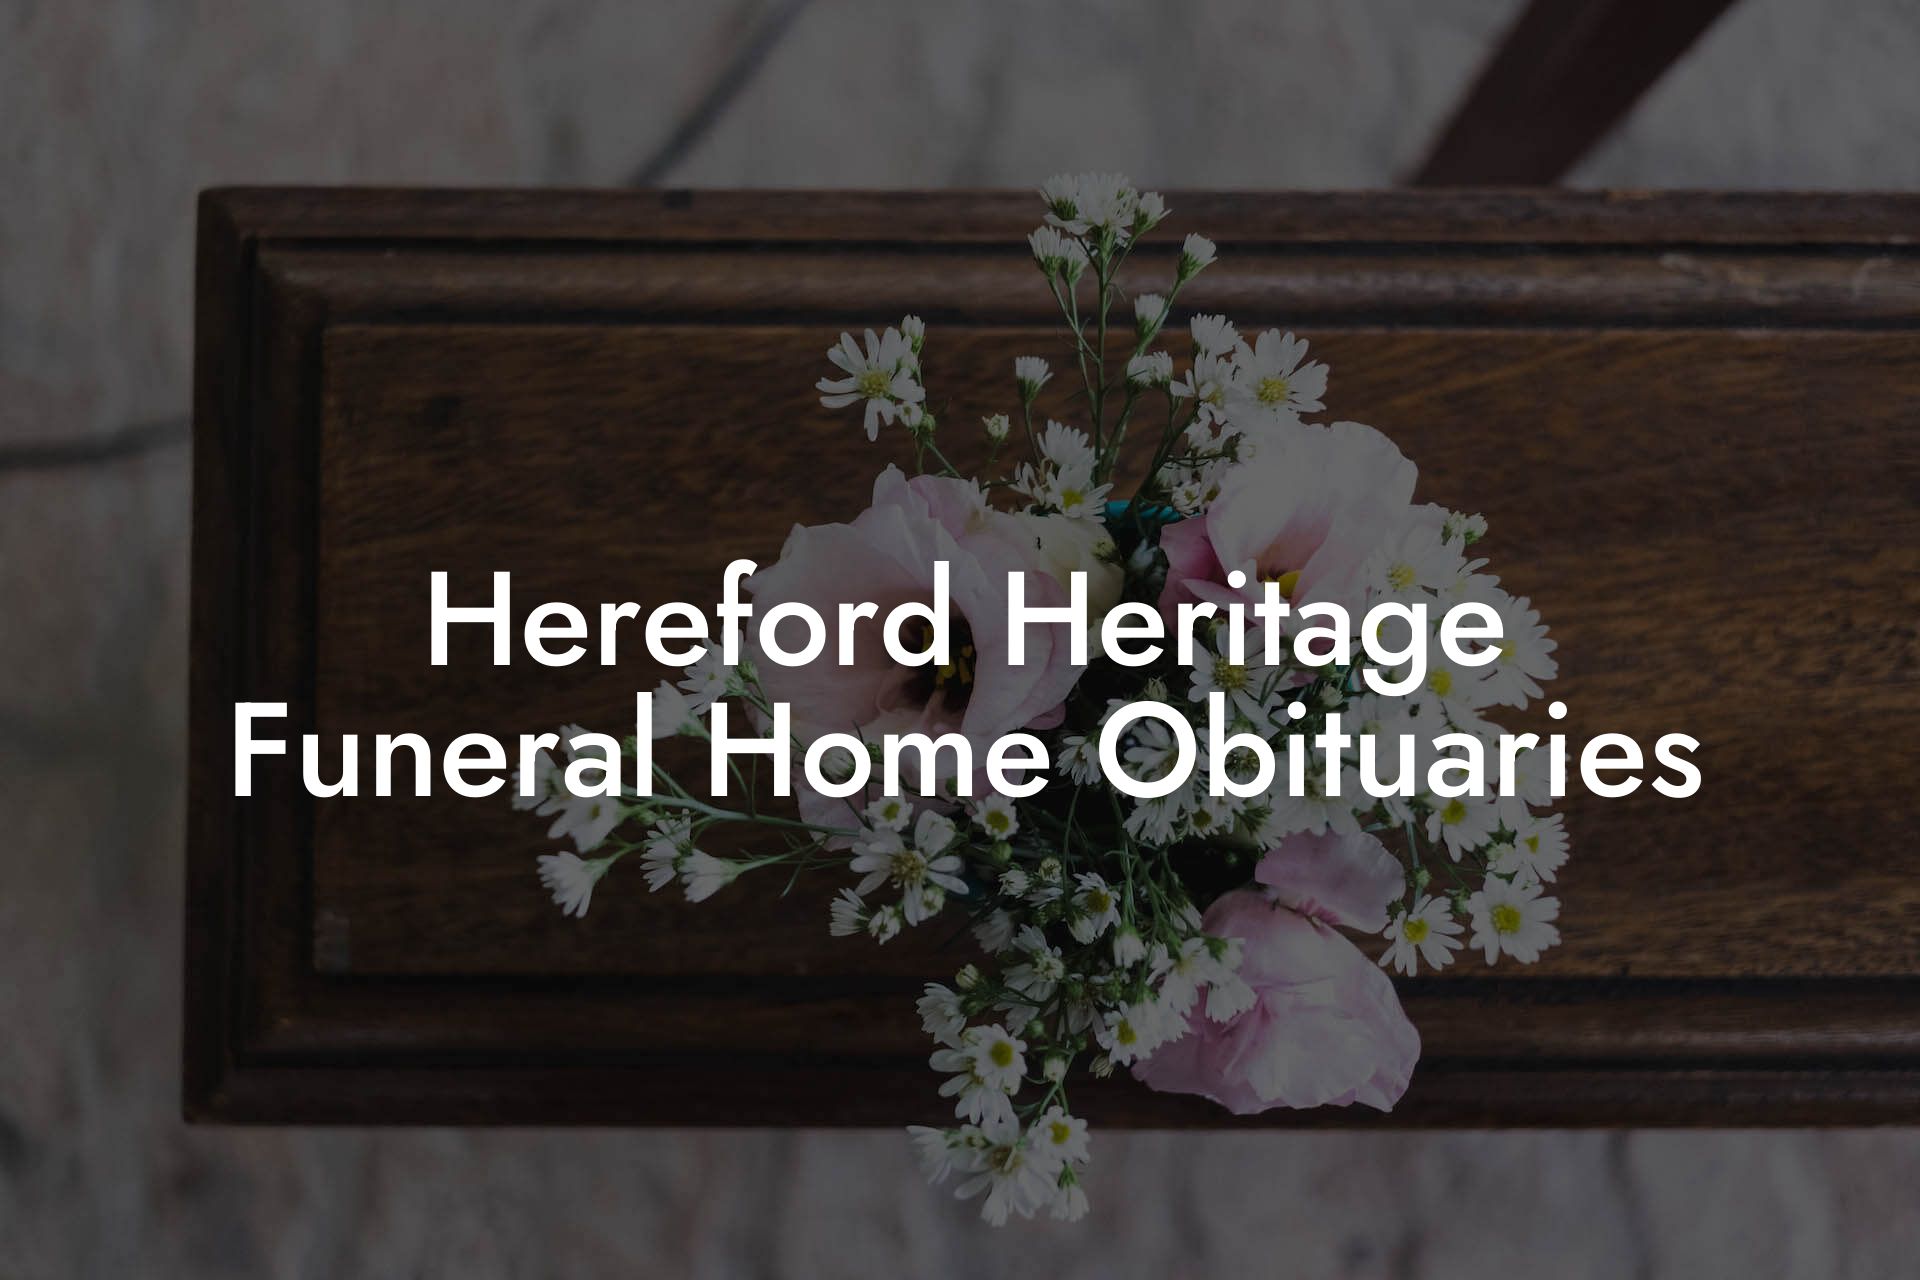 Hereford Heritage Funeral Home Obituaries